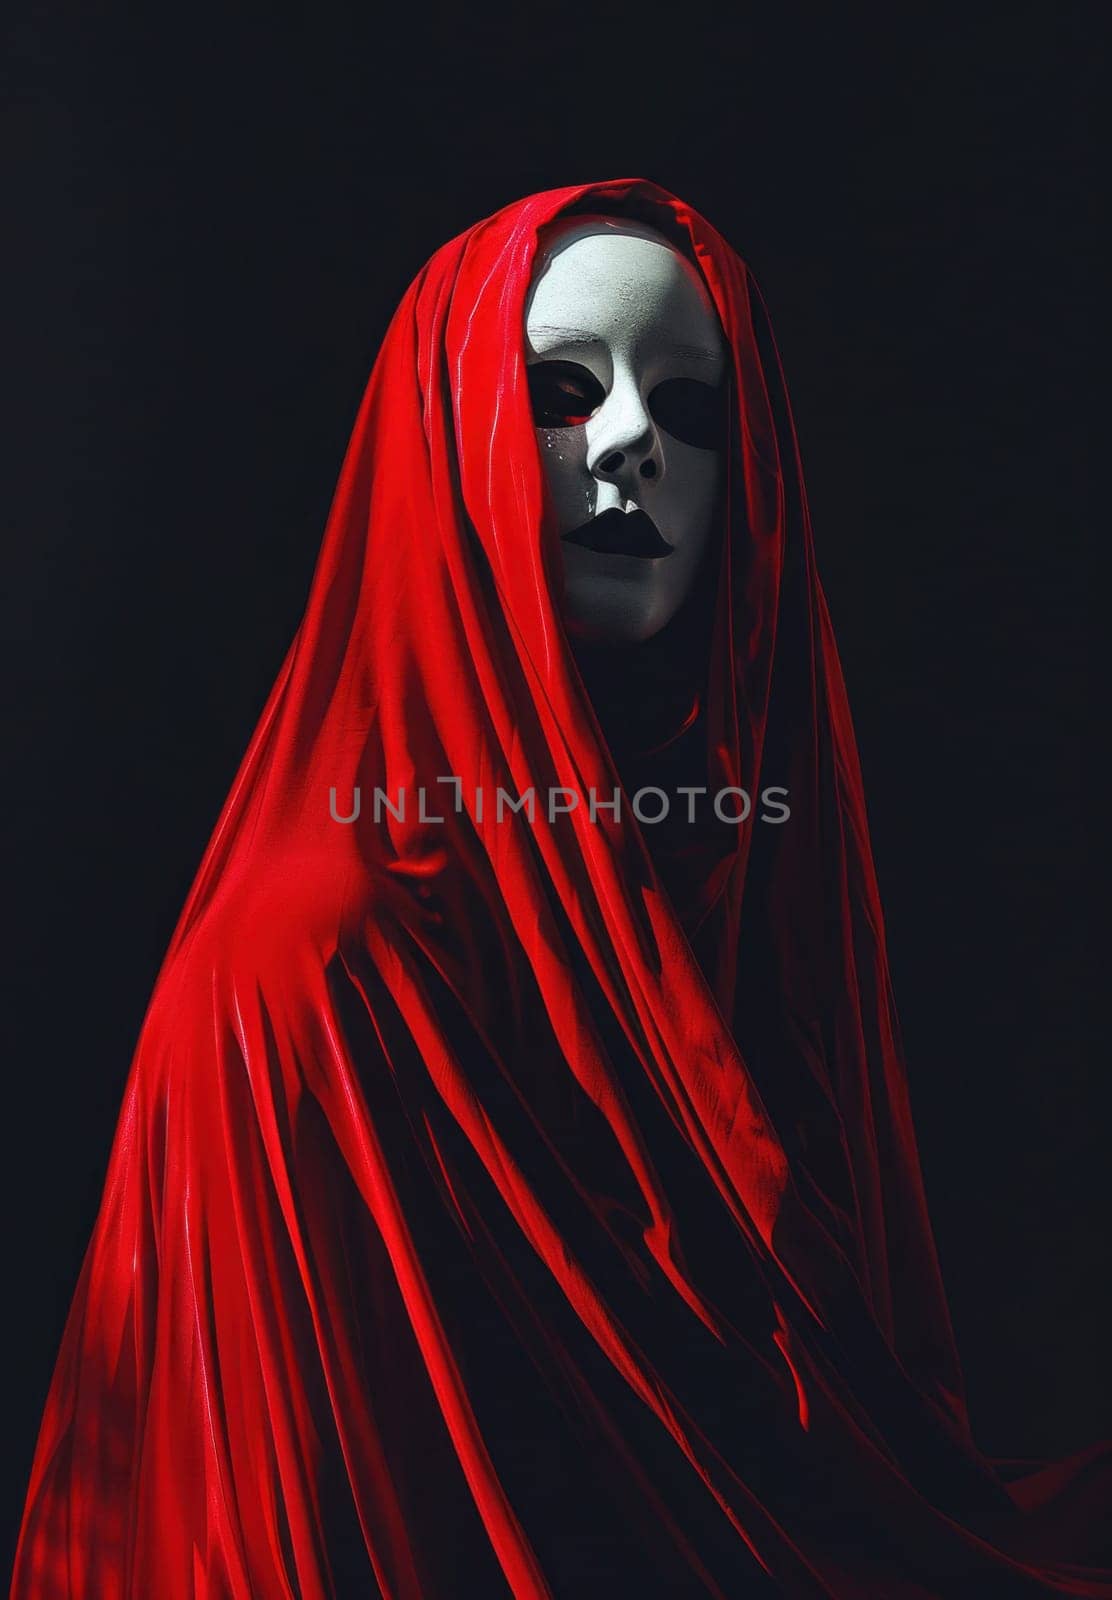 Mysterious woman in red cloak with white mask on face standing against black background symbolizing beauty and art